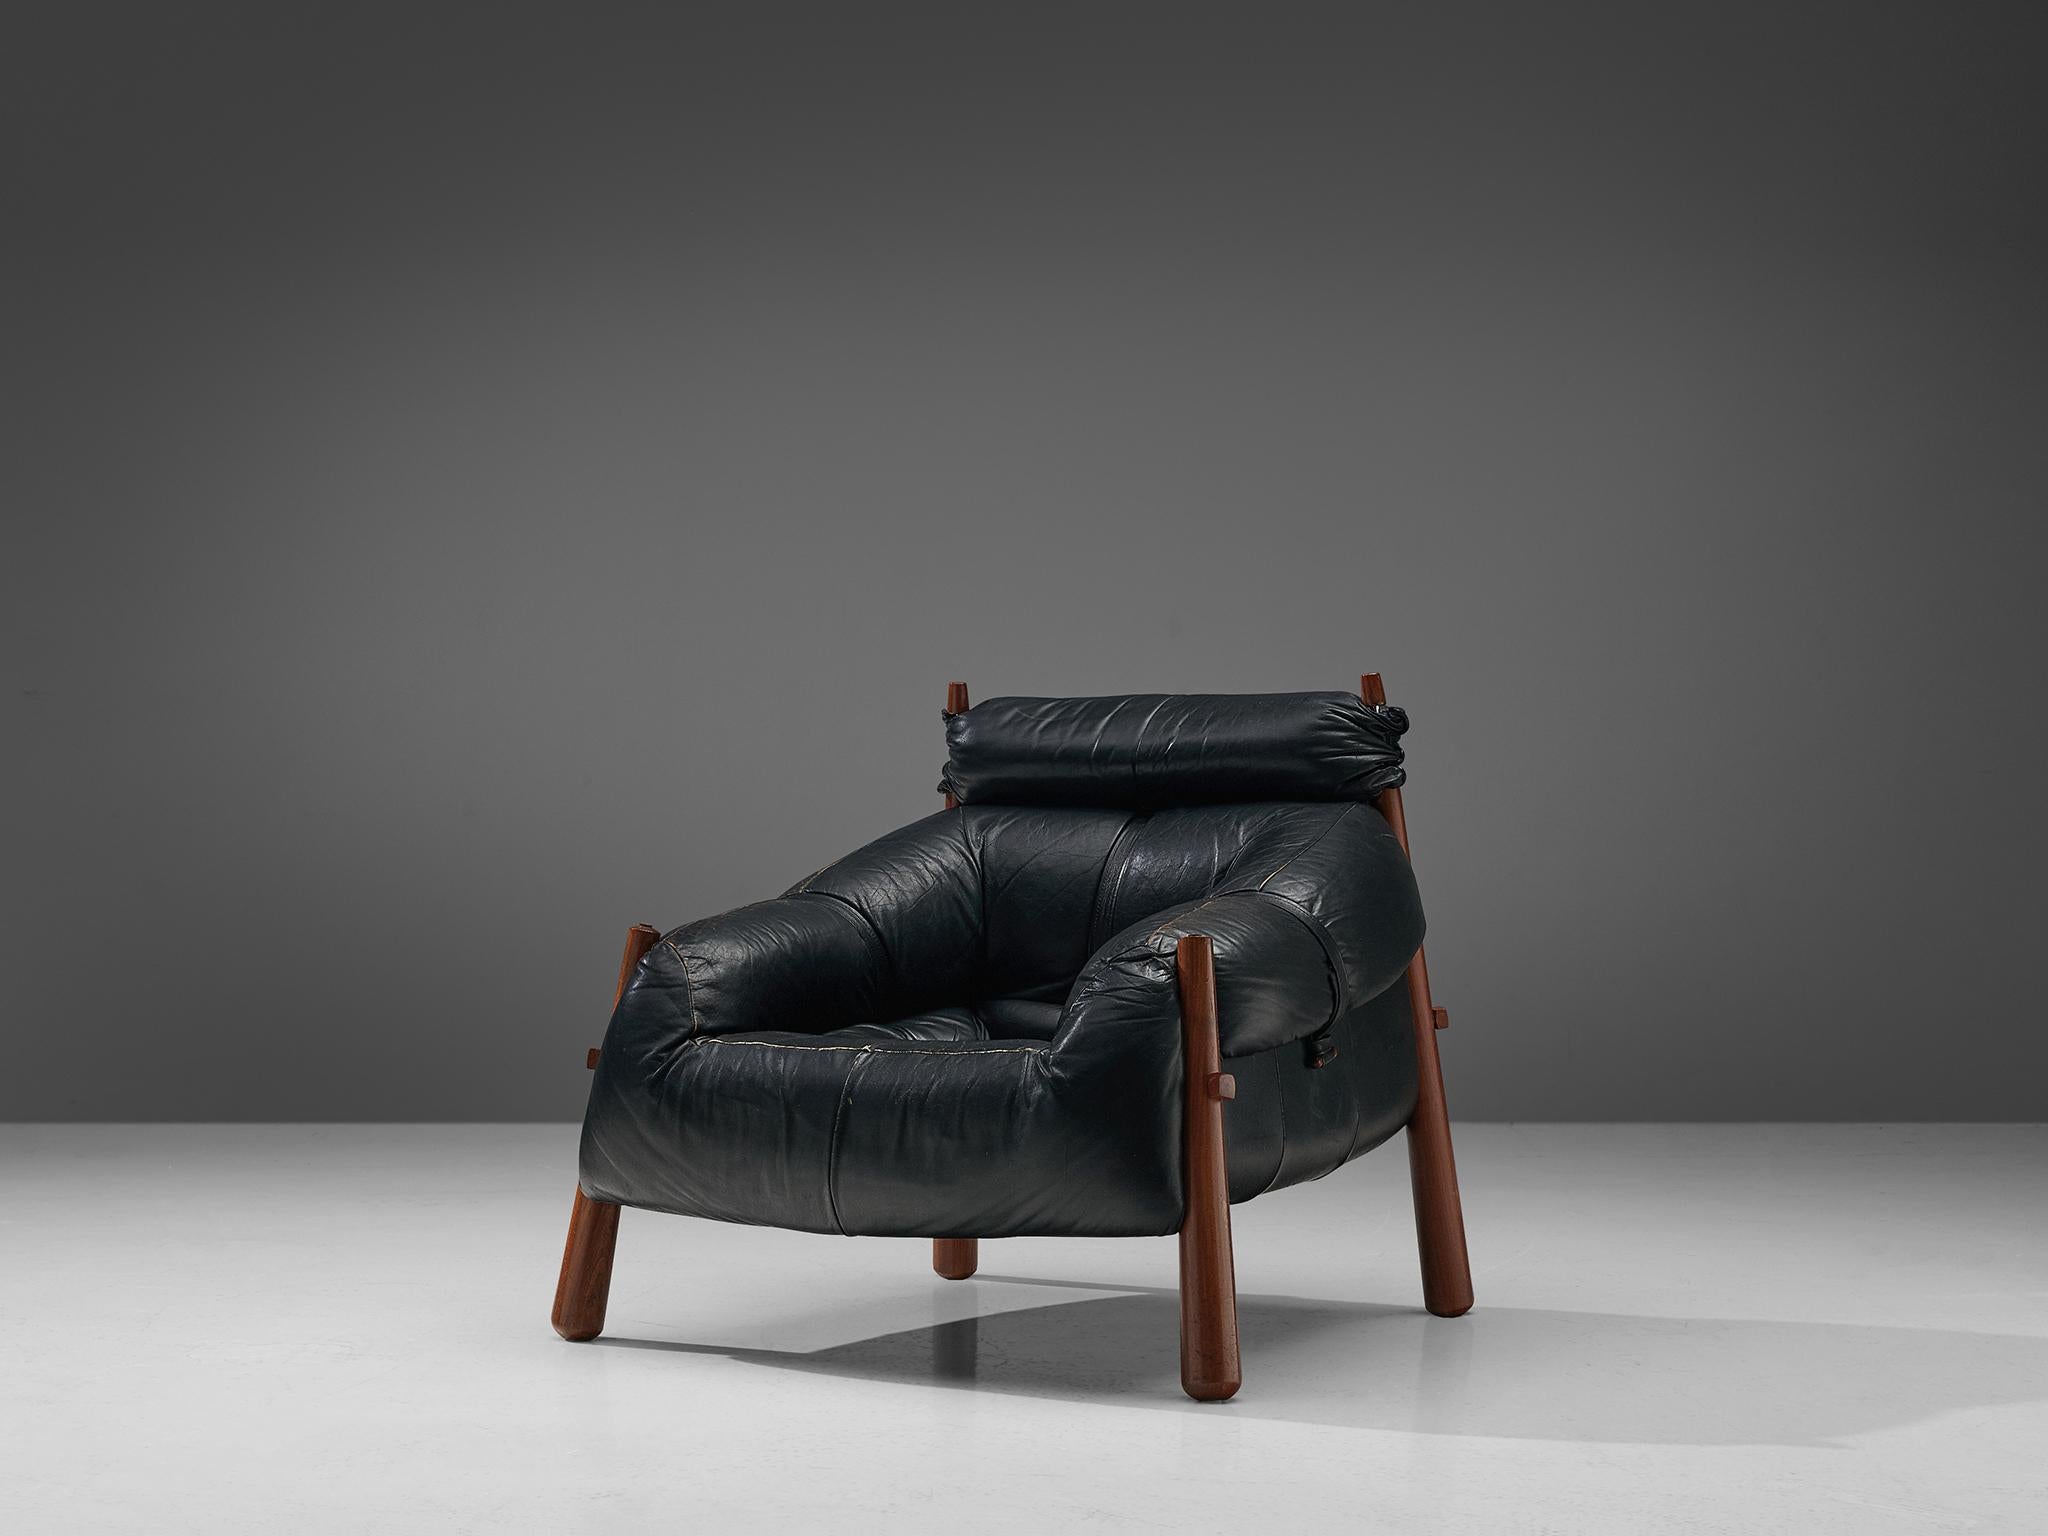 Percival Lafer, lounge chair model 'MP-81', leather and Brazilian walnut, Brazil, 1972. 

Beautiful lounge chair by Brazilian designer Percival Lafer. These chairs consist of a solid wooden base to which the leather seating is attached. The tufted